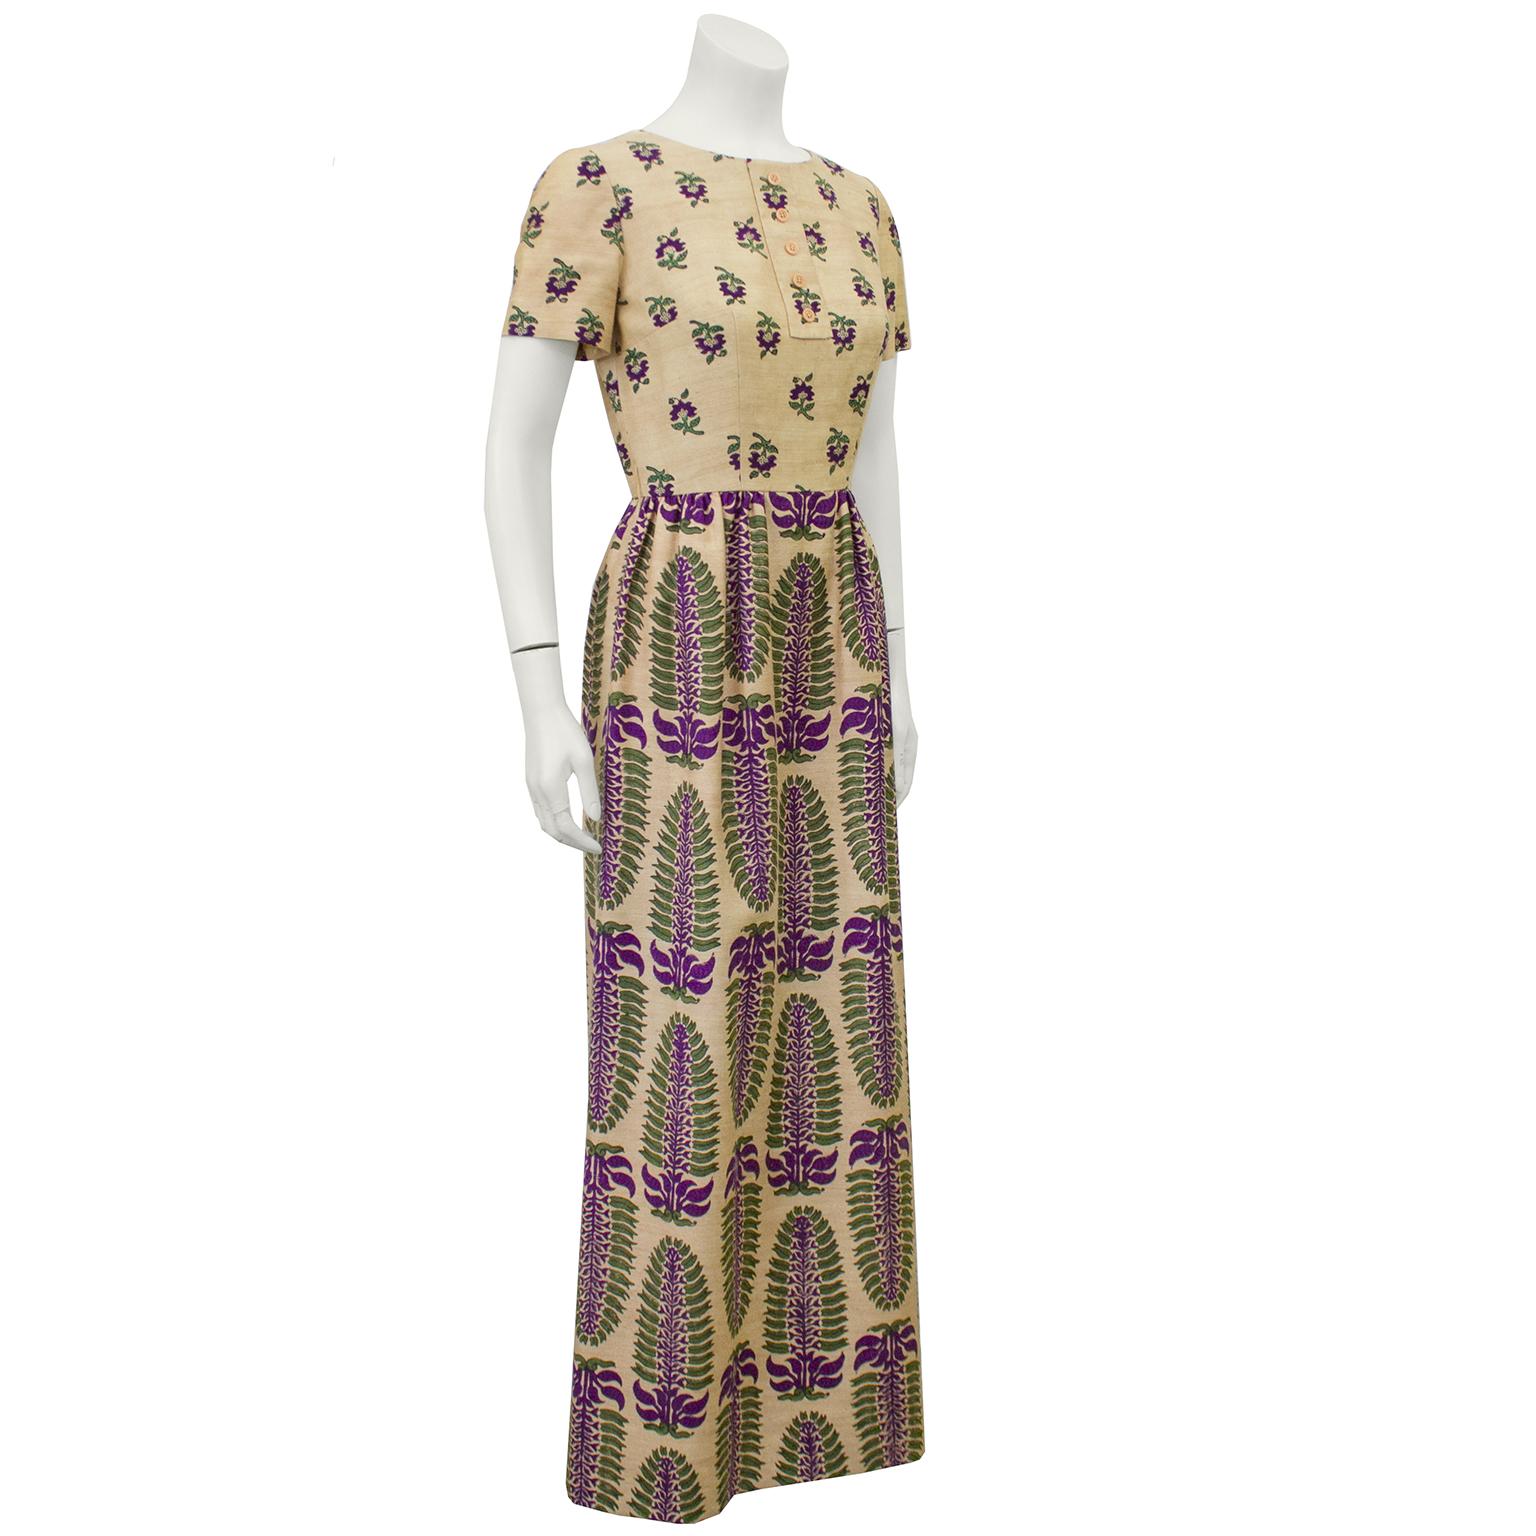 Inspired by the Thai silk from the far east, this late 1970s Lanvin dress and jacket ensemble is made from a beautiful beige shantung silk and is printed in the Bagh style throughout in violet and green floral pattern. The dress has short sleeves